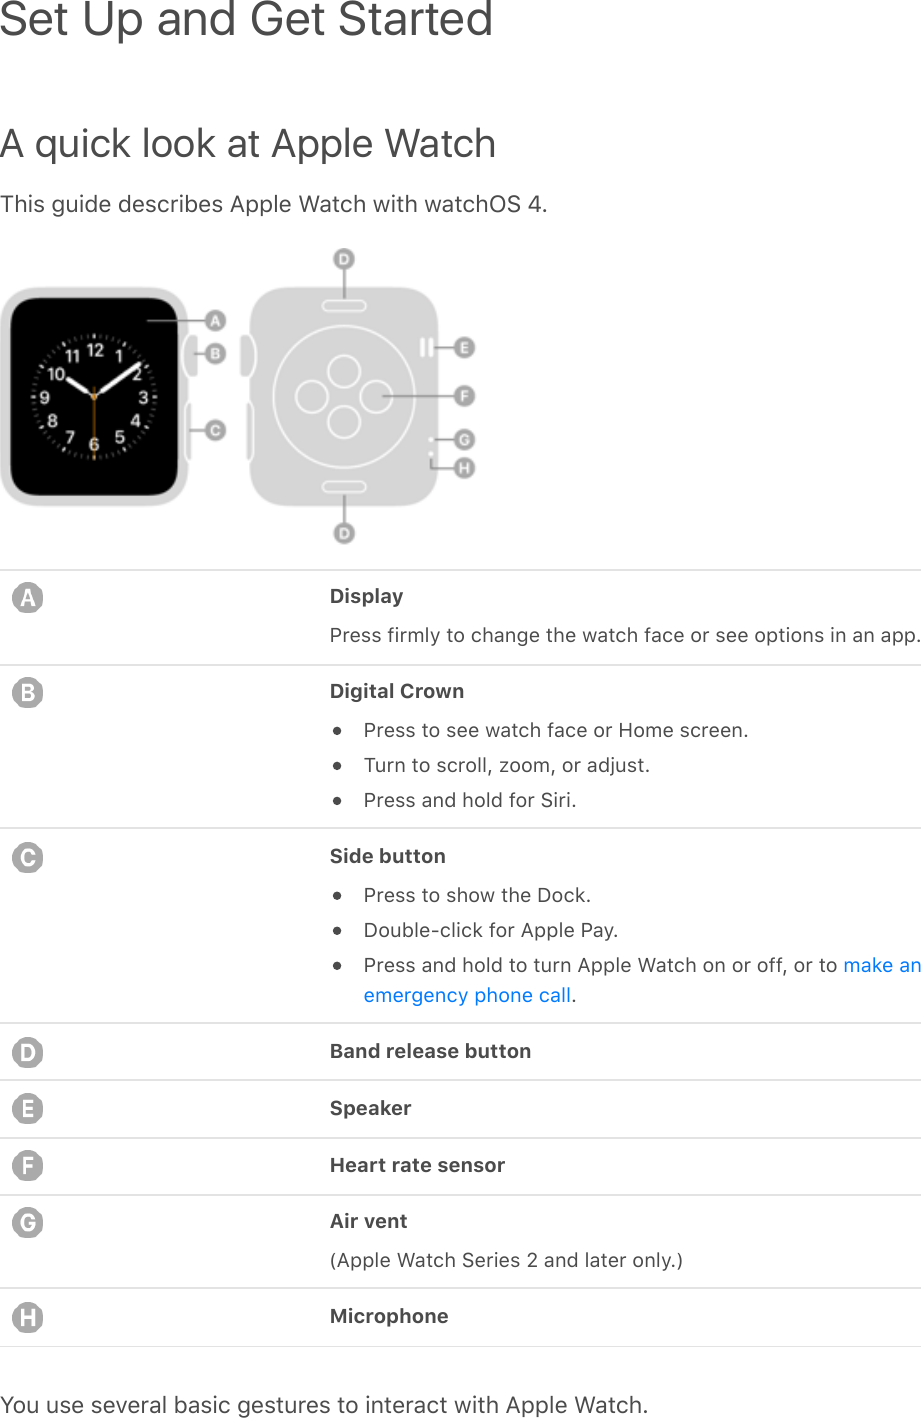 A quick look at Apple WatchThis guide describes Apple Watch with watchOS 4.DisplayPress firmly to change the watch face or see options in an app.Digital CrownPress to see watch face or Home screen.Turn to scroll, zoom, or adjust.Press and hold for Siri.Side buttonPress to show the Dock.Double-click for Apple Pay.Press and hold to turn Apple Watch on or off, or to .Band release buttonSpeakerHeart rate sensorAir vent(Apple Watch Series 2 and later only.)MicrophoneYou use several basic gestures to interact with Apple Watch.Set Up and Get Startedmake anemergency phone call